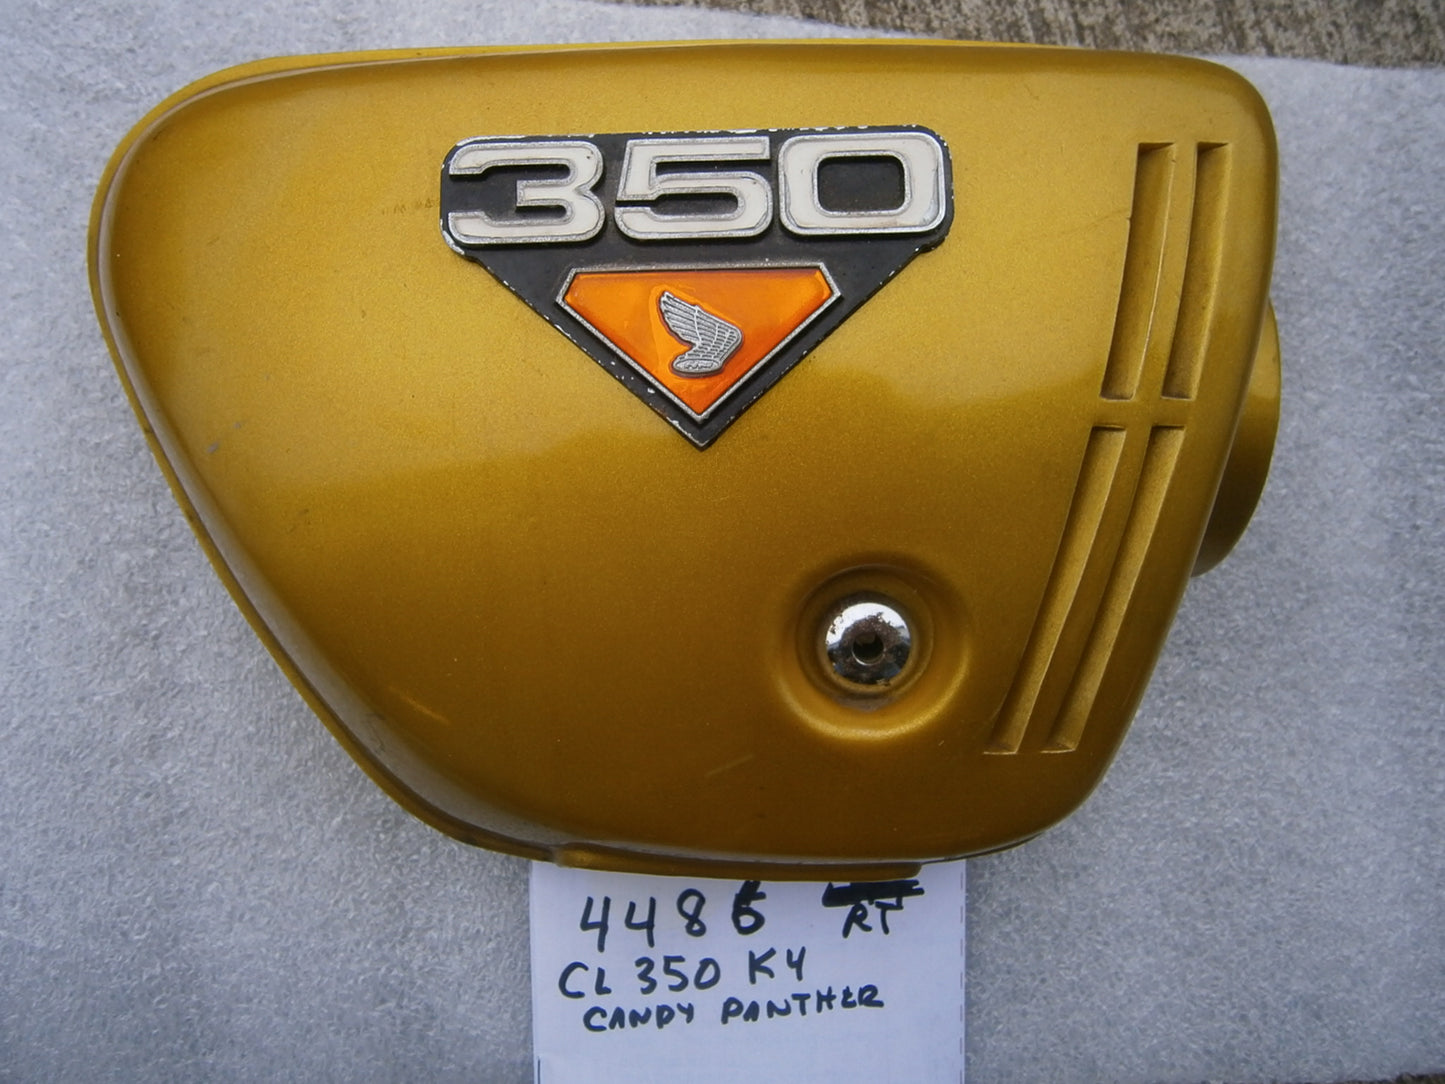 Honda CL350 Right Candy Panther Gold Sidecover with badge 4486